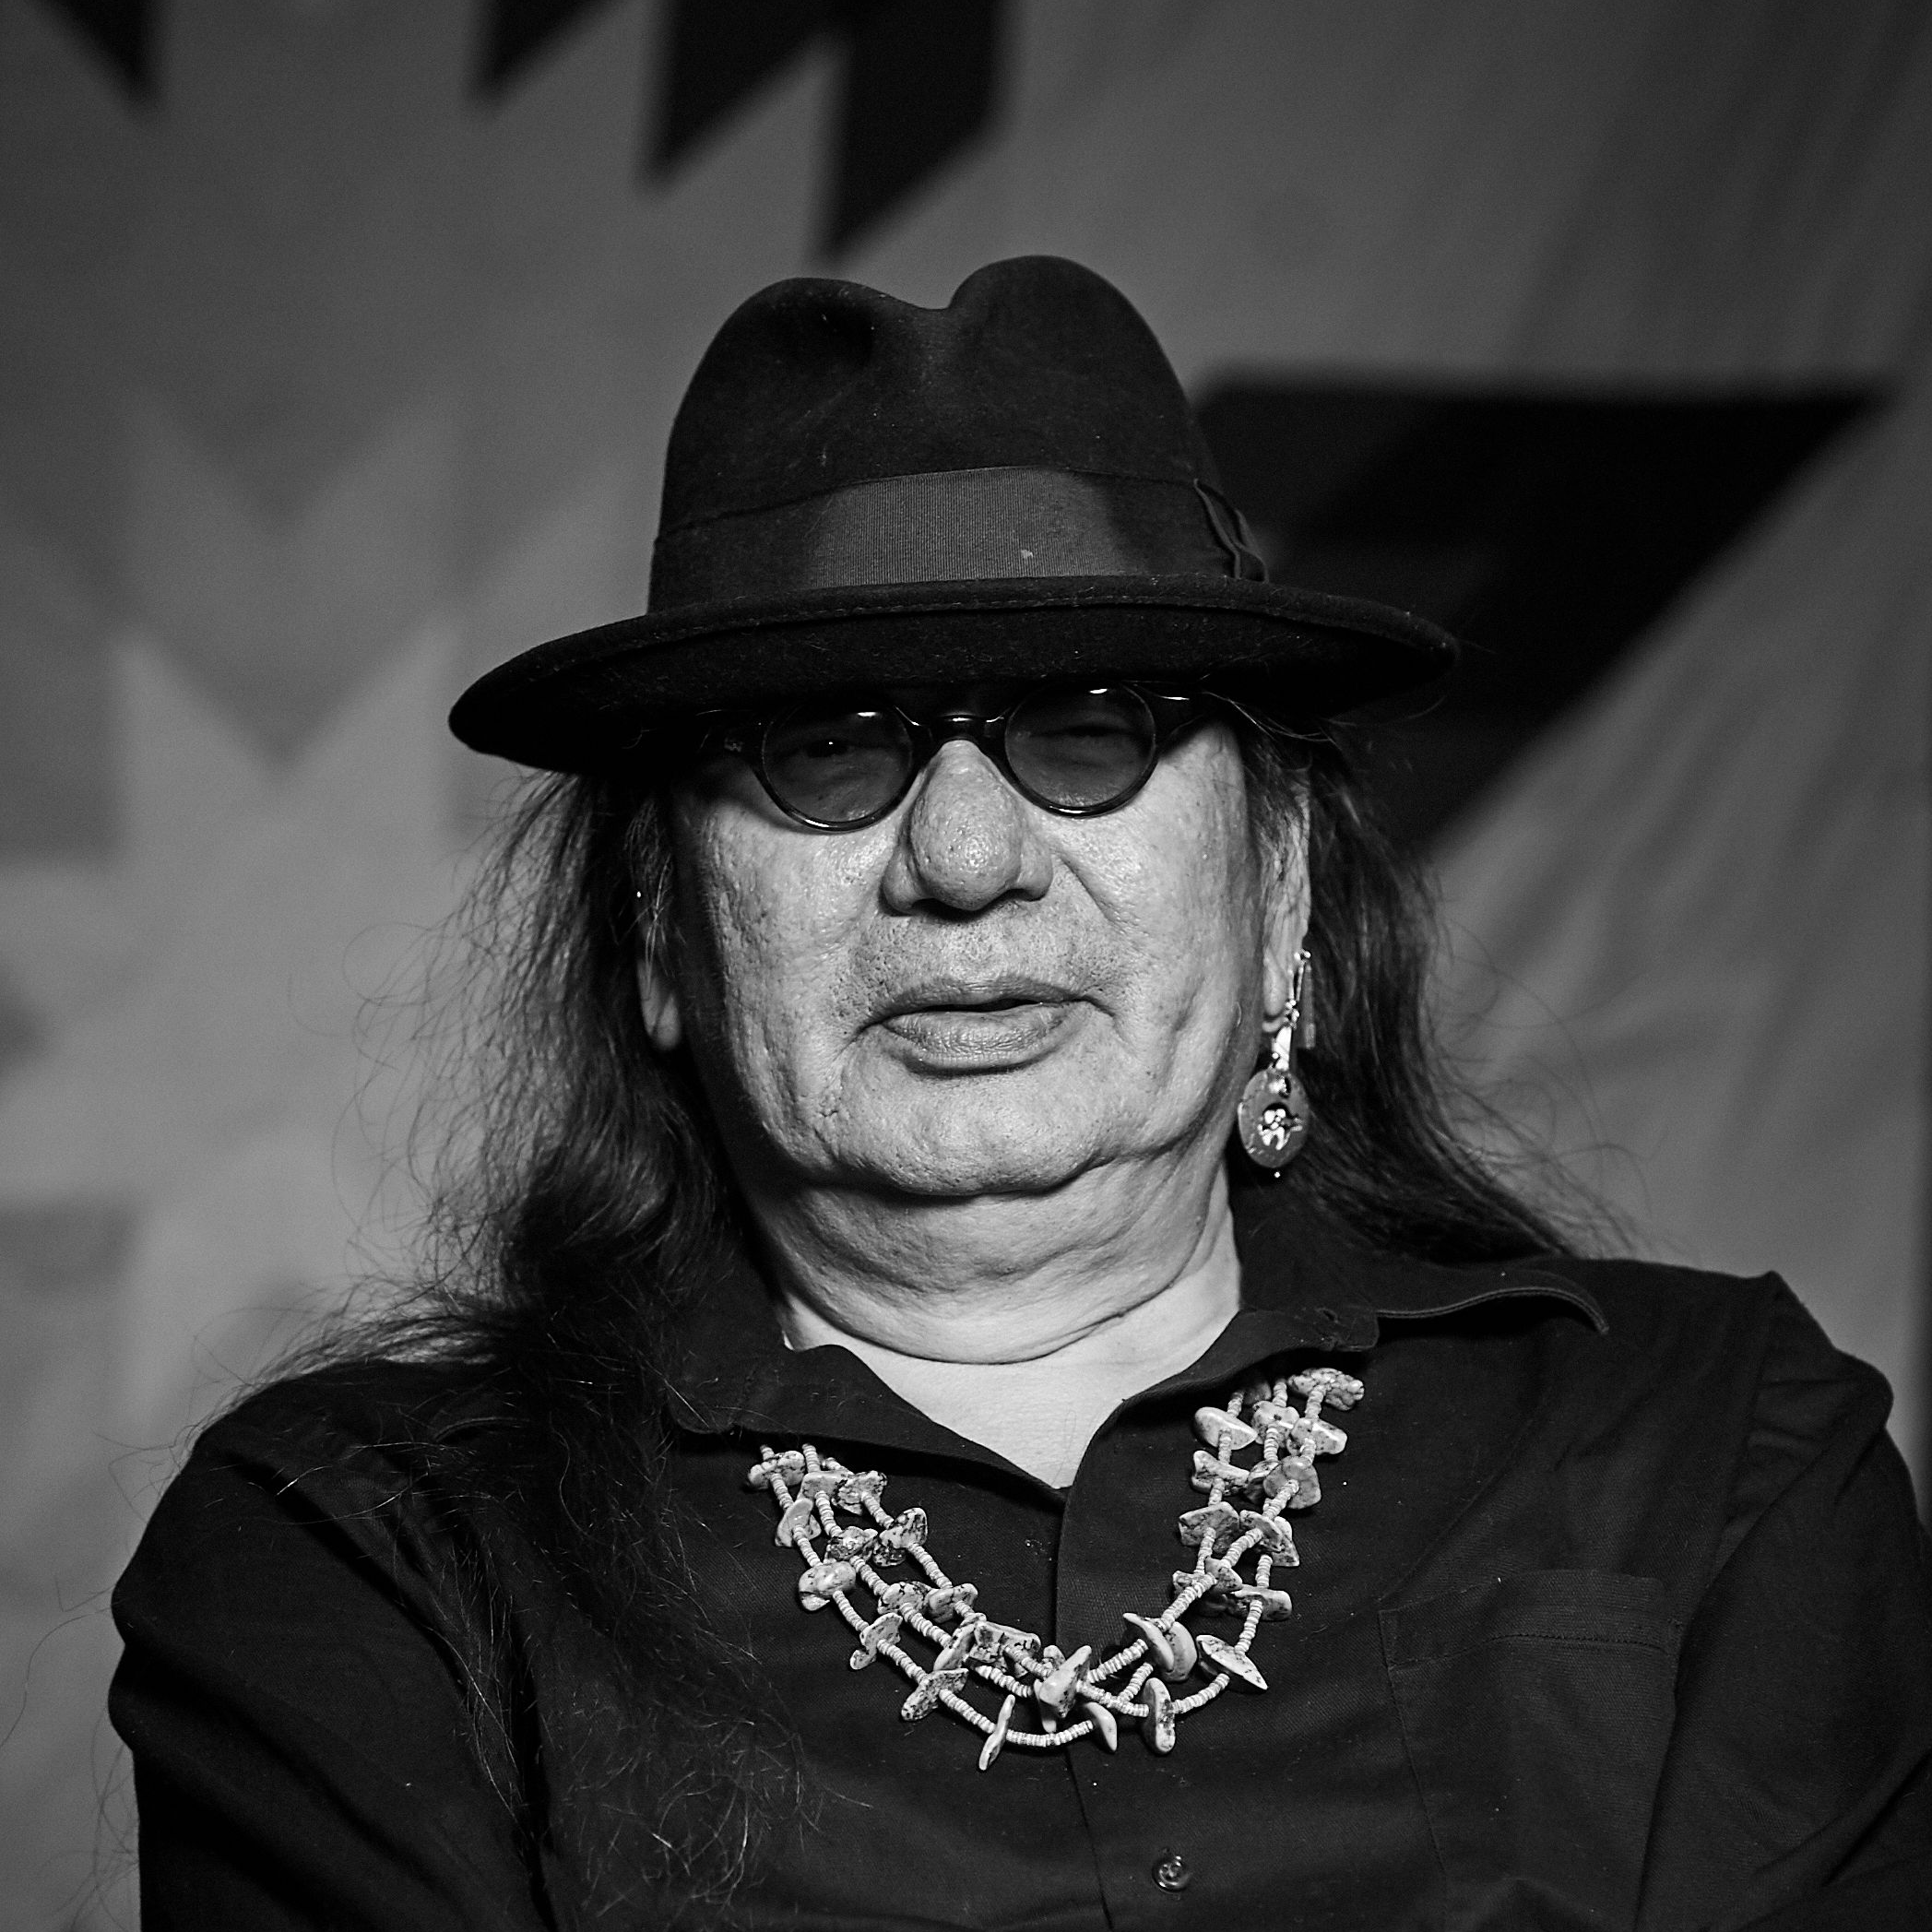 A black photo of a man with long hair, wearing glasses and a hat.